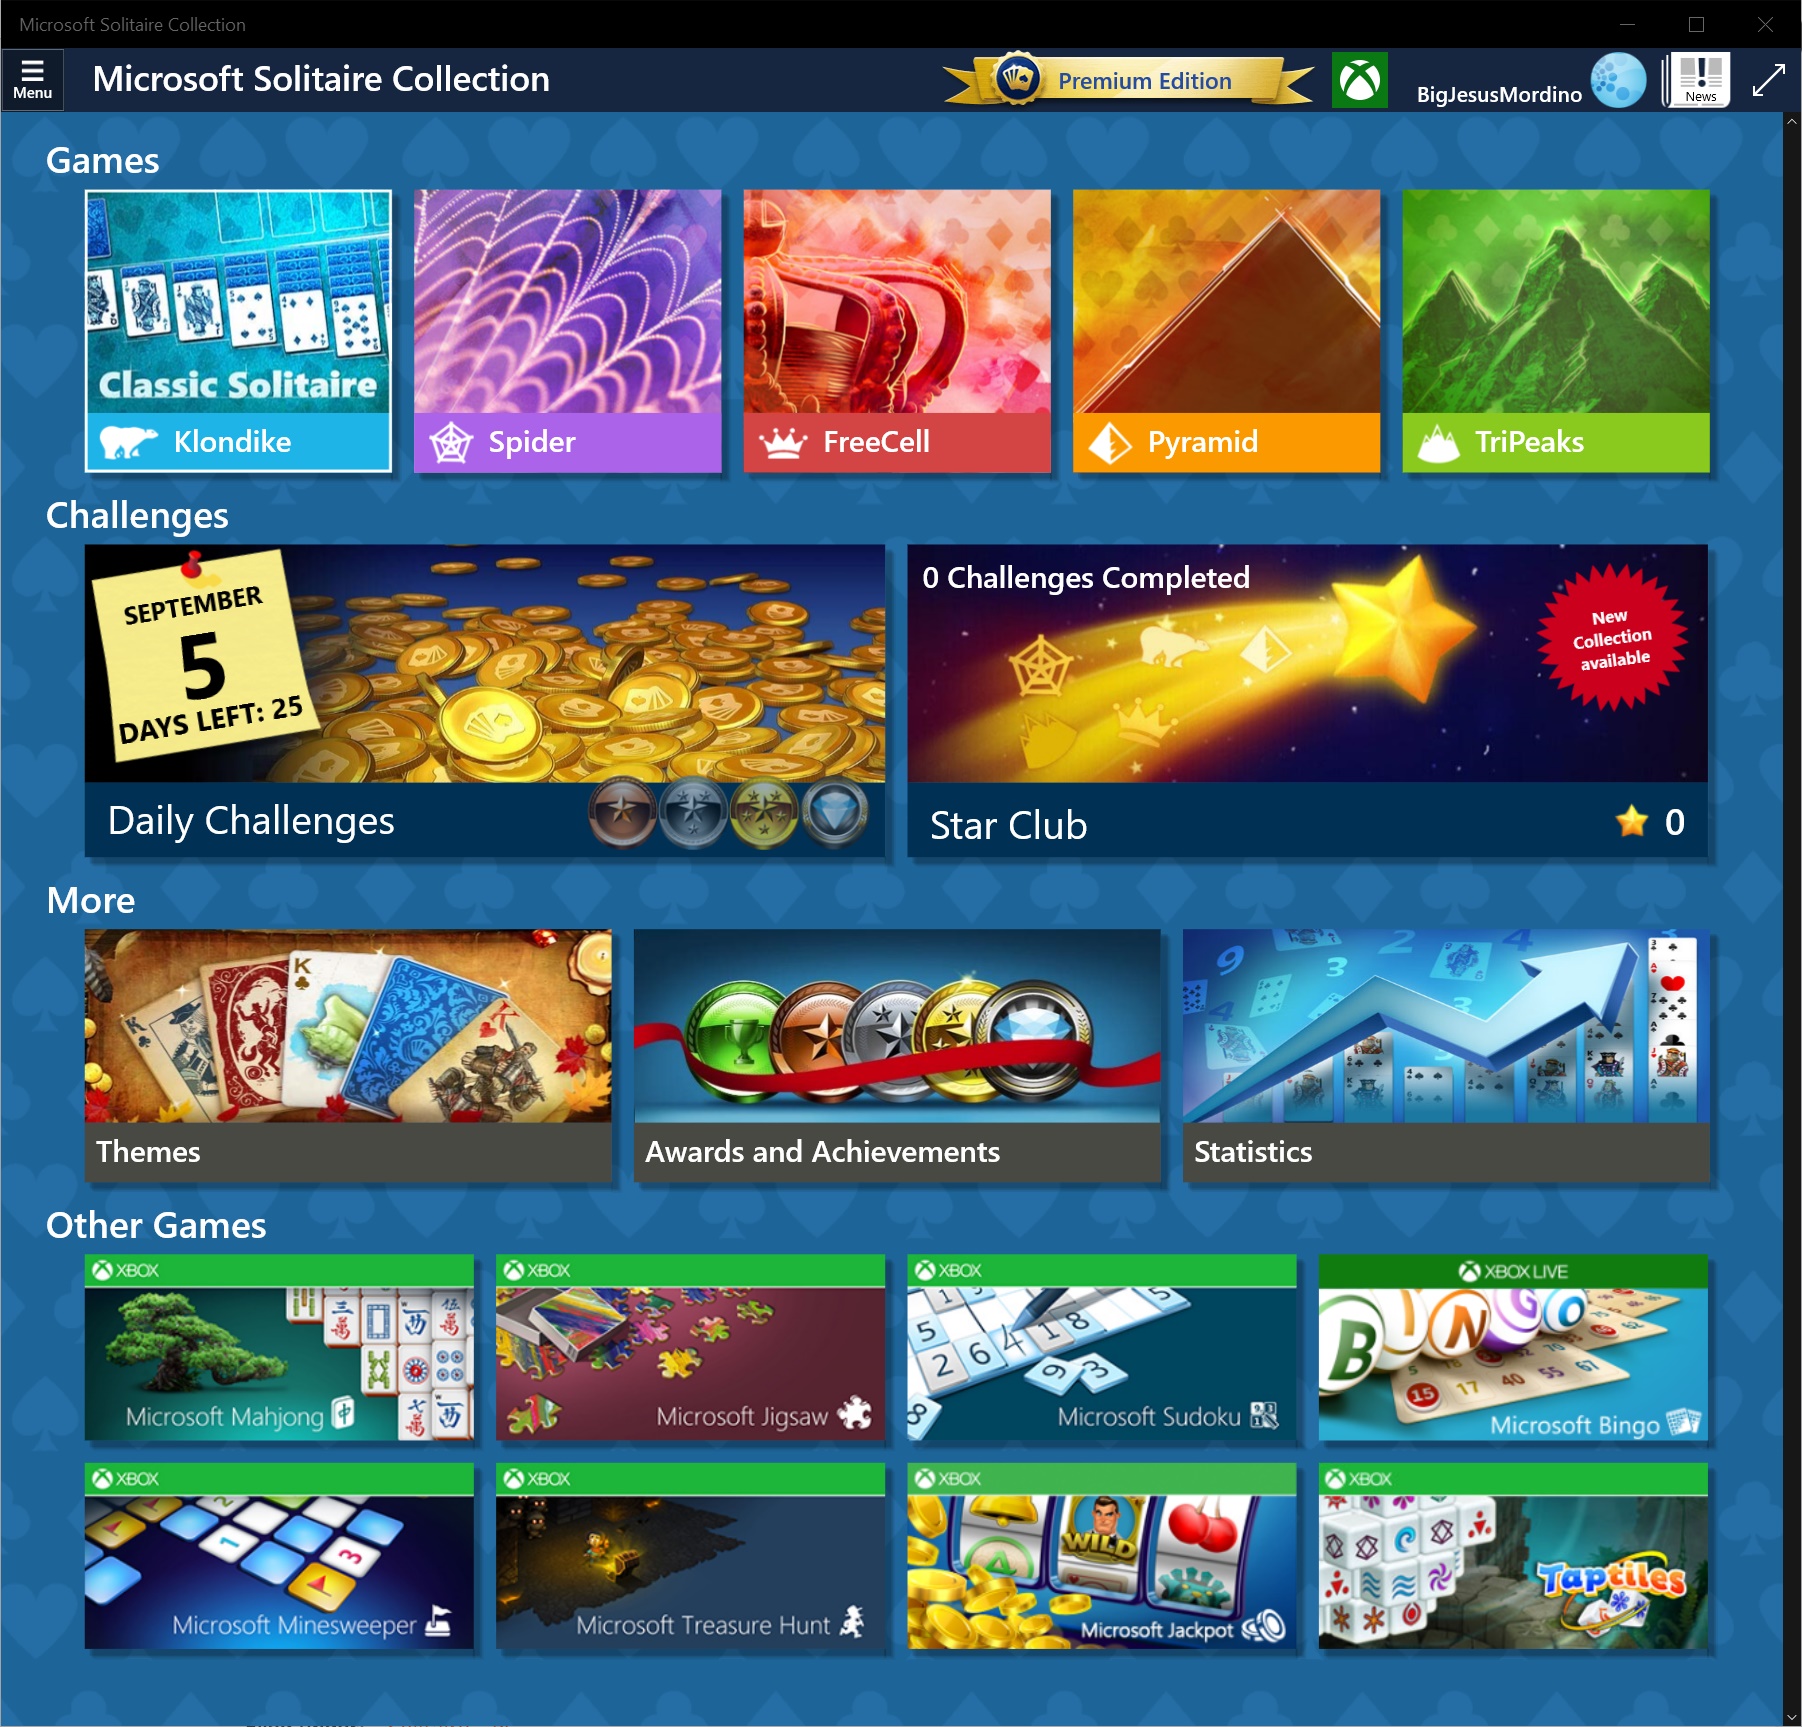 The Ultimate Solitaire Collection releases on Xbox and PC